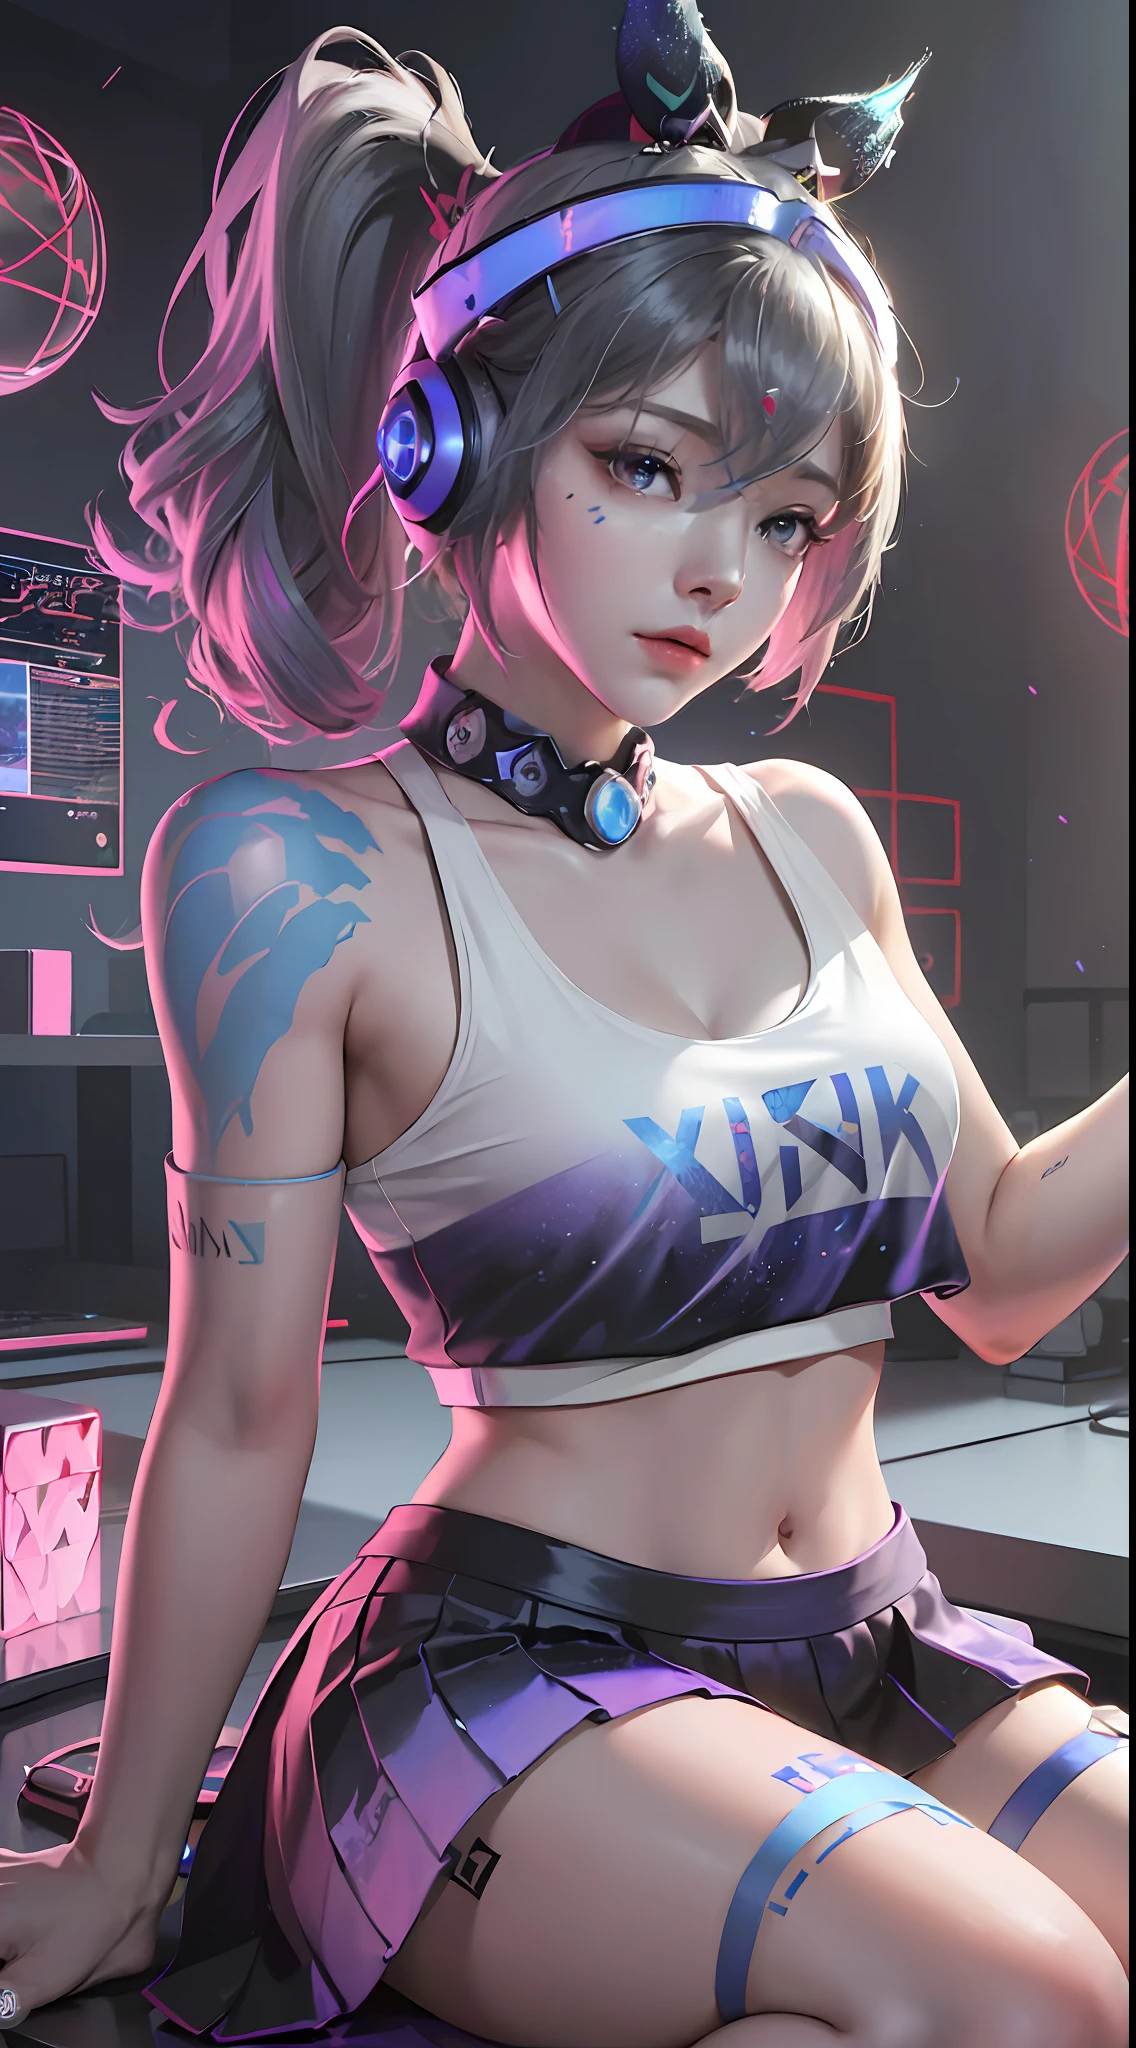 (((((7 avatar shot)))), Silver Wolf, Masterpiece, Best Quality, Ultra Detailed, Extremely Detailed 16k CG Wallpaper, Beautiful Face, (Silver Wolf in Esports Room), (Perfect Beautiful Curved Figure), Seated, Rainbow Color Jewel Eyes, Wearing Resin Hologram Sports Bra, Crop Top Drape, Mini Pleated Skirt, Bell Collar, Logo, Impotence, Contour Light, Concert, Neon Sign, Audio, Bell Collar, Esports Headset, Computer, Esports Room, Play Games, White Interior Through Red Skin, holographic projection, flat sphere, graffiti logo, highly detailed tattoo_,
Authoring information